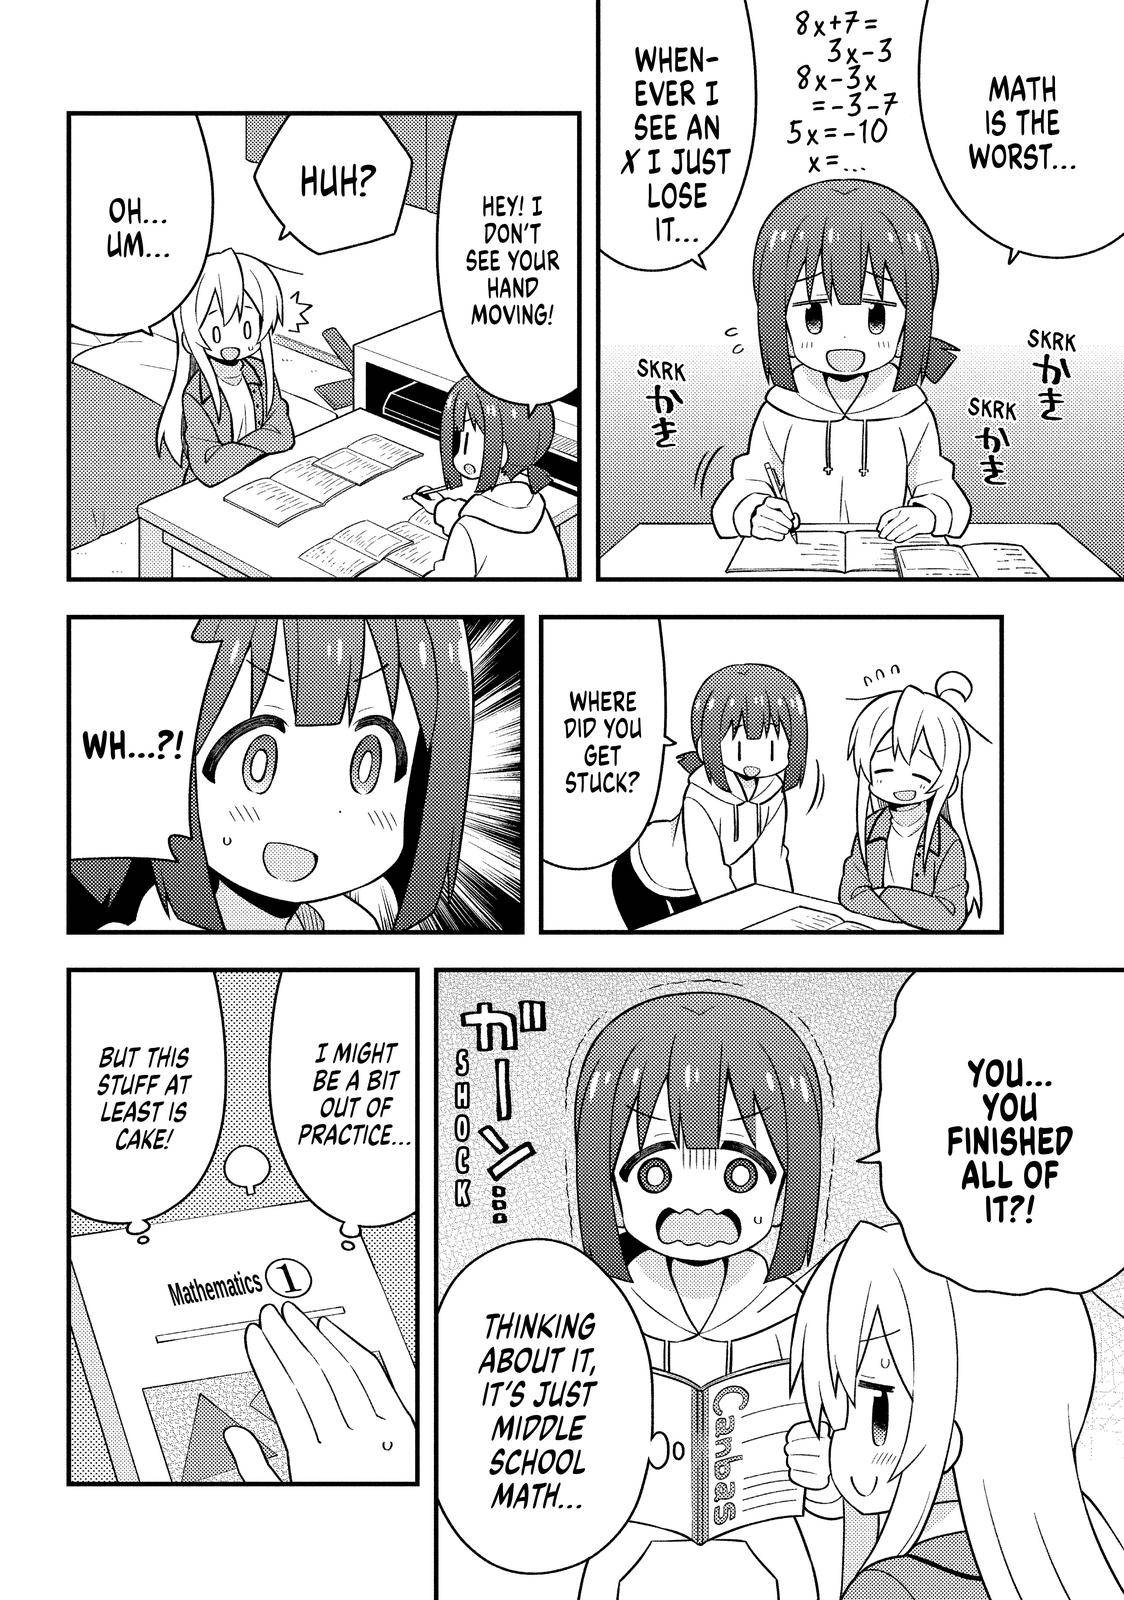 ONIMAI - I'm Now Your Sister! - chapter 23 - #6